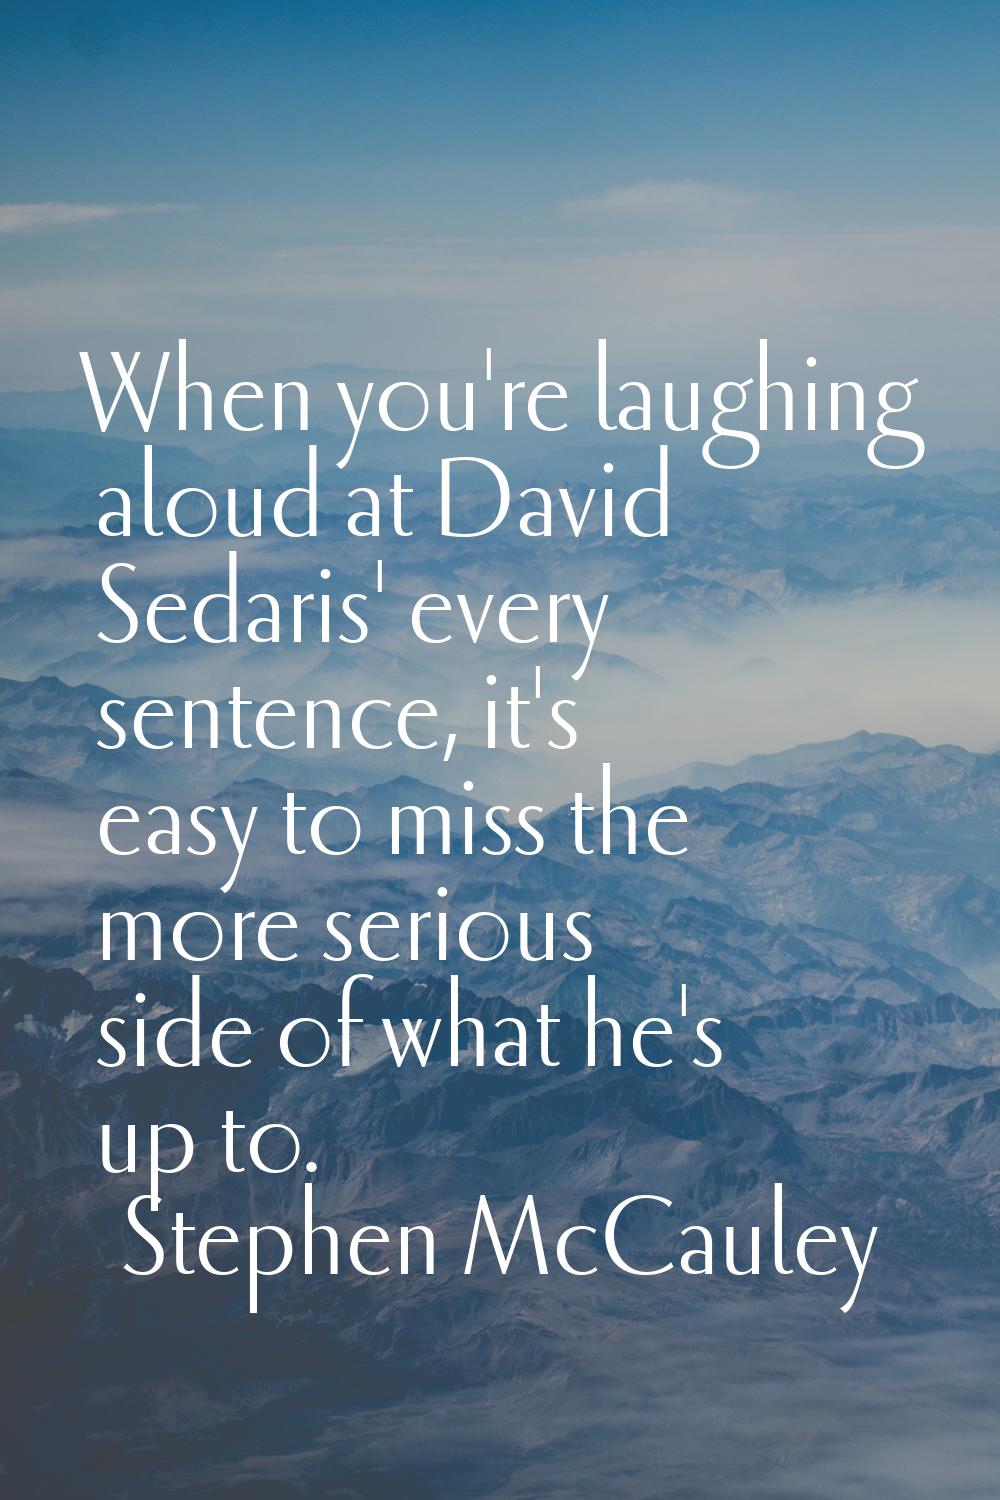 When you're laughing aloud at David Sedaris' every sentence, it's easy to miss the more serious sid